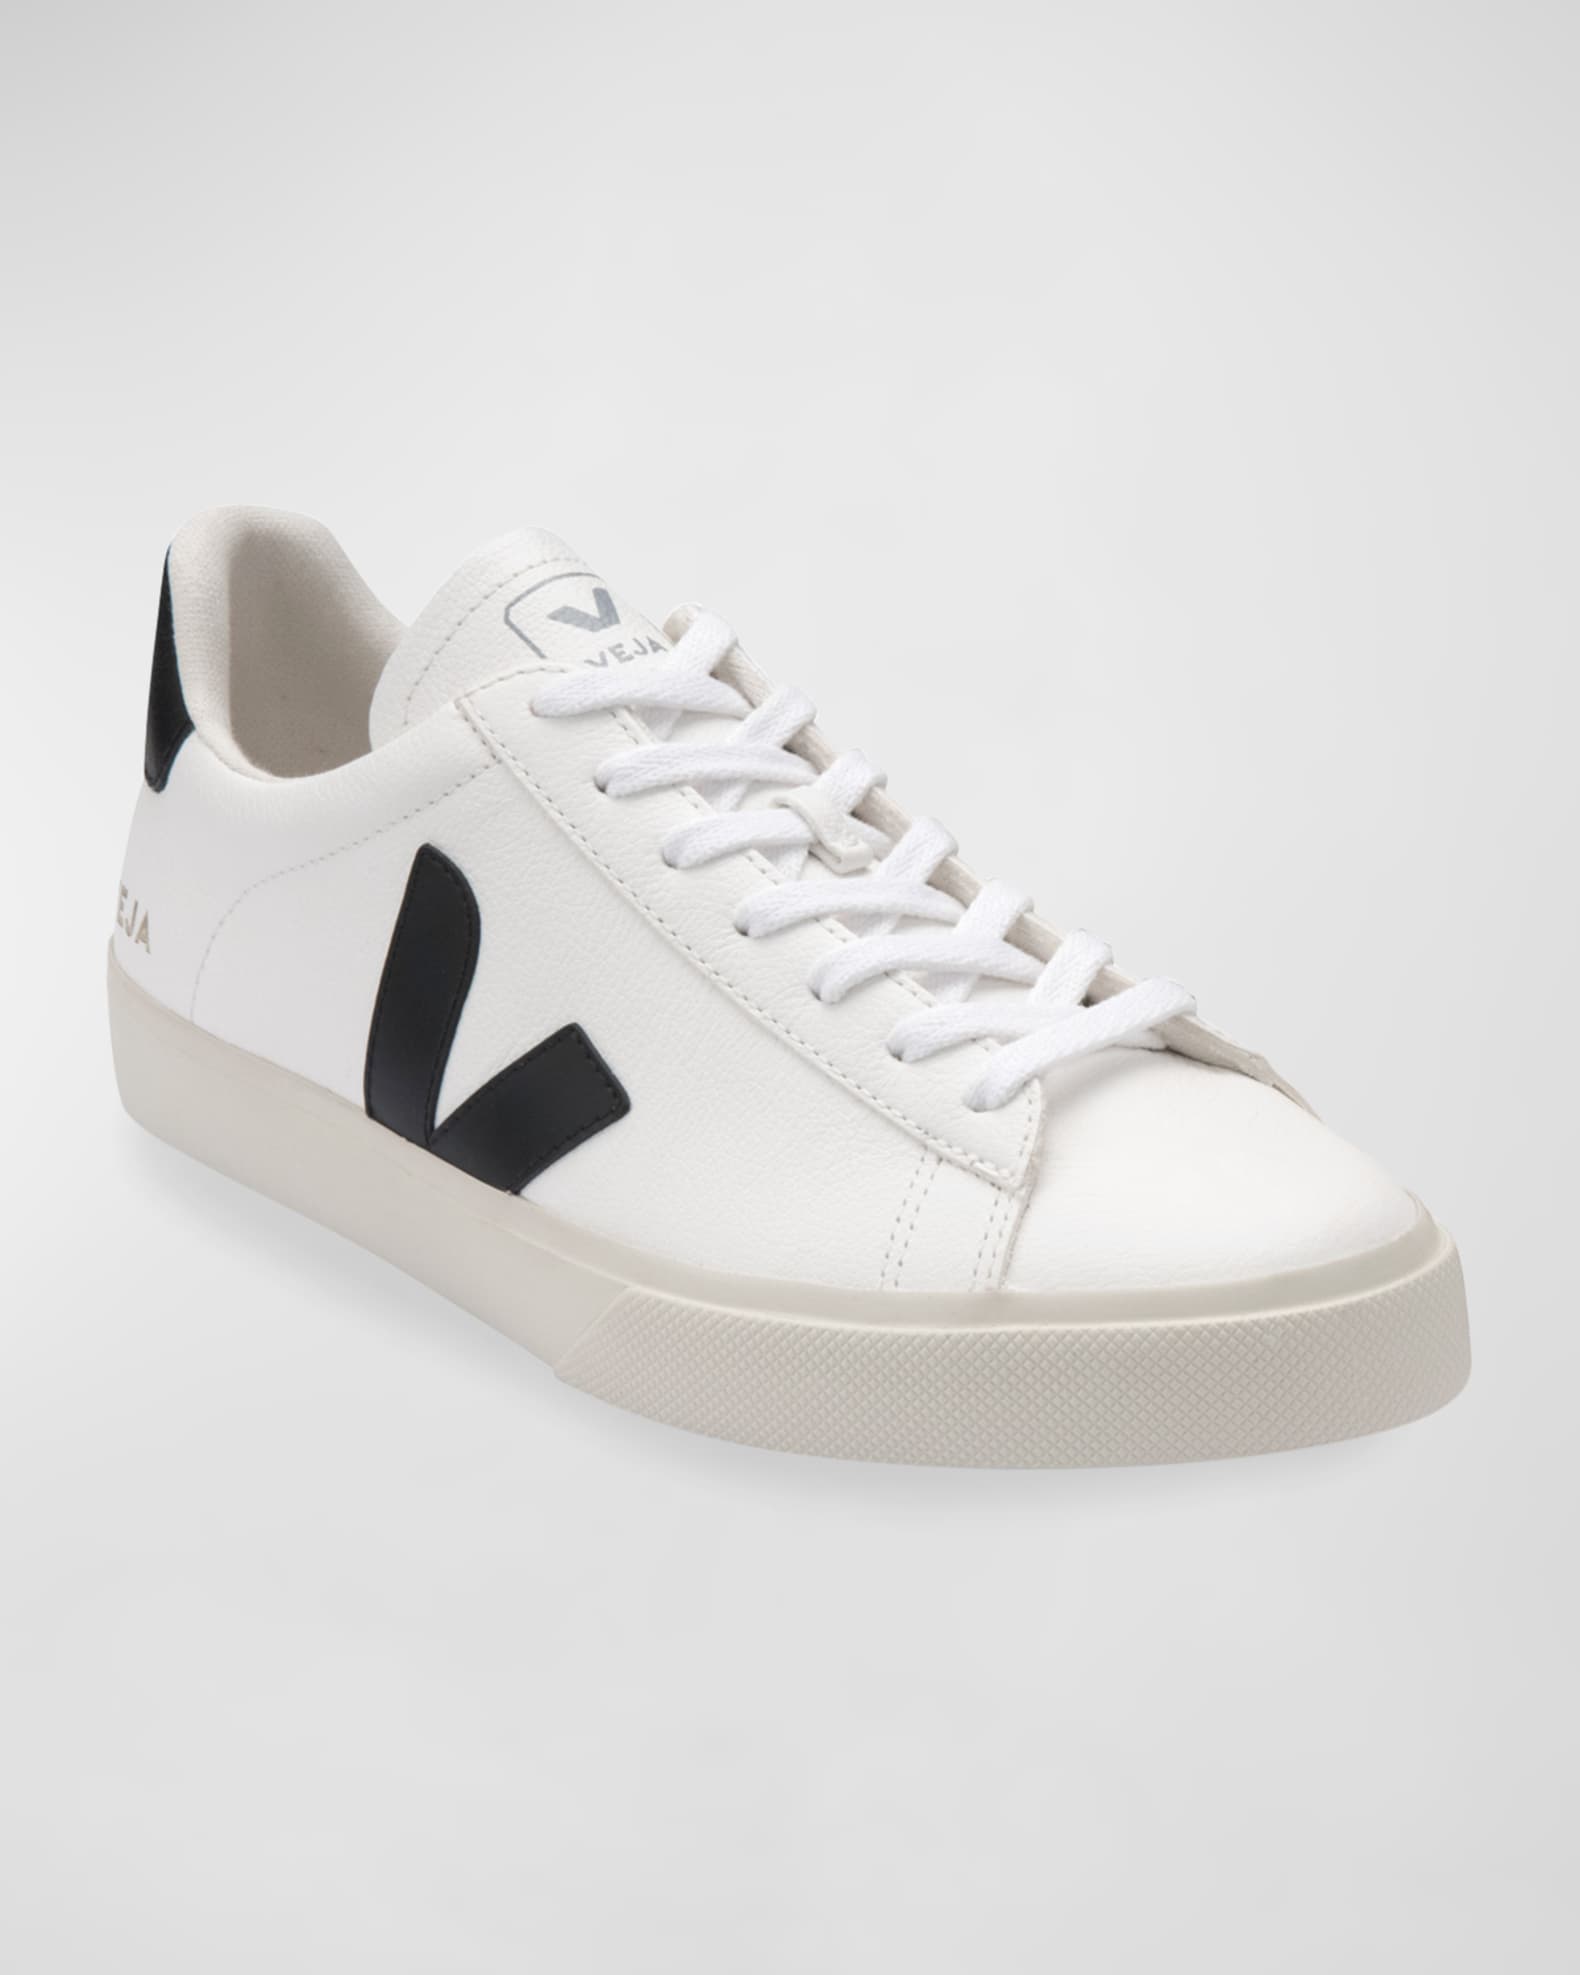 Campo Bicolor Leather Low-Top Sneakers | Neiman Marcus